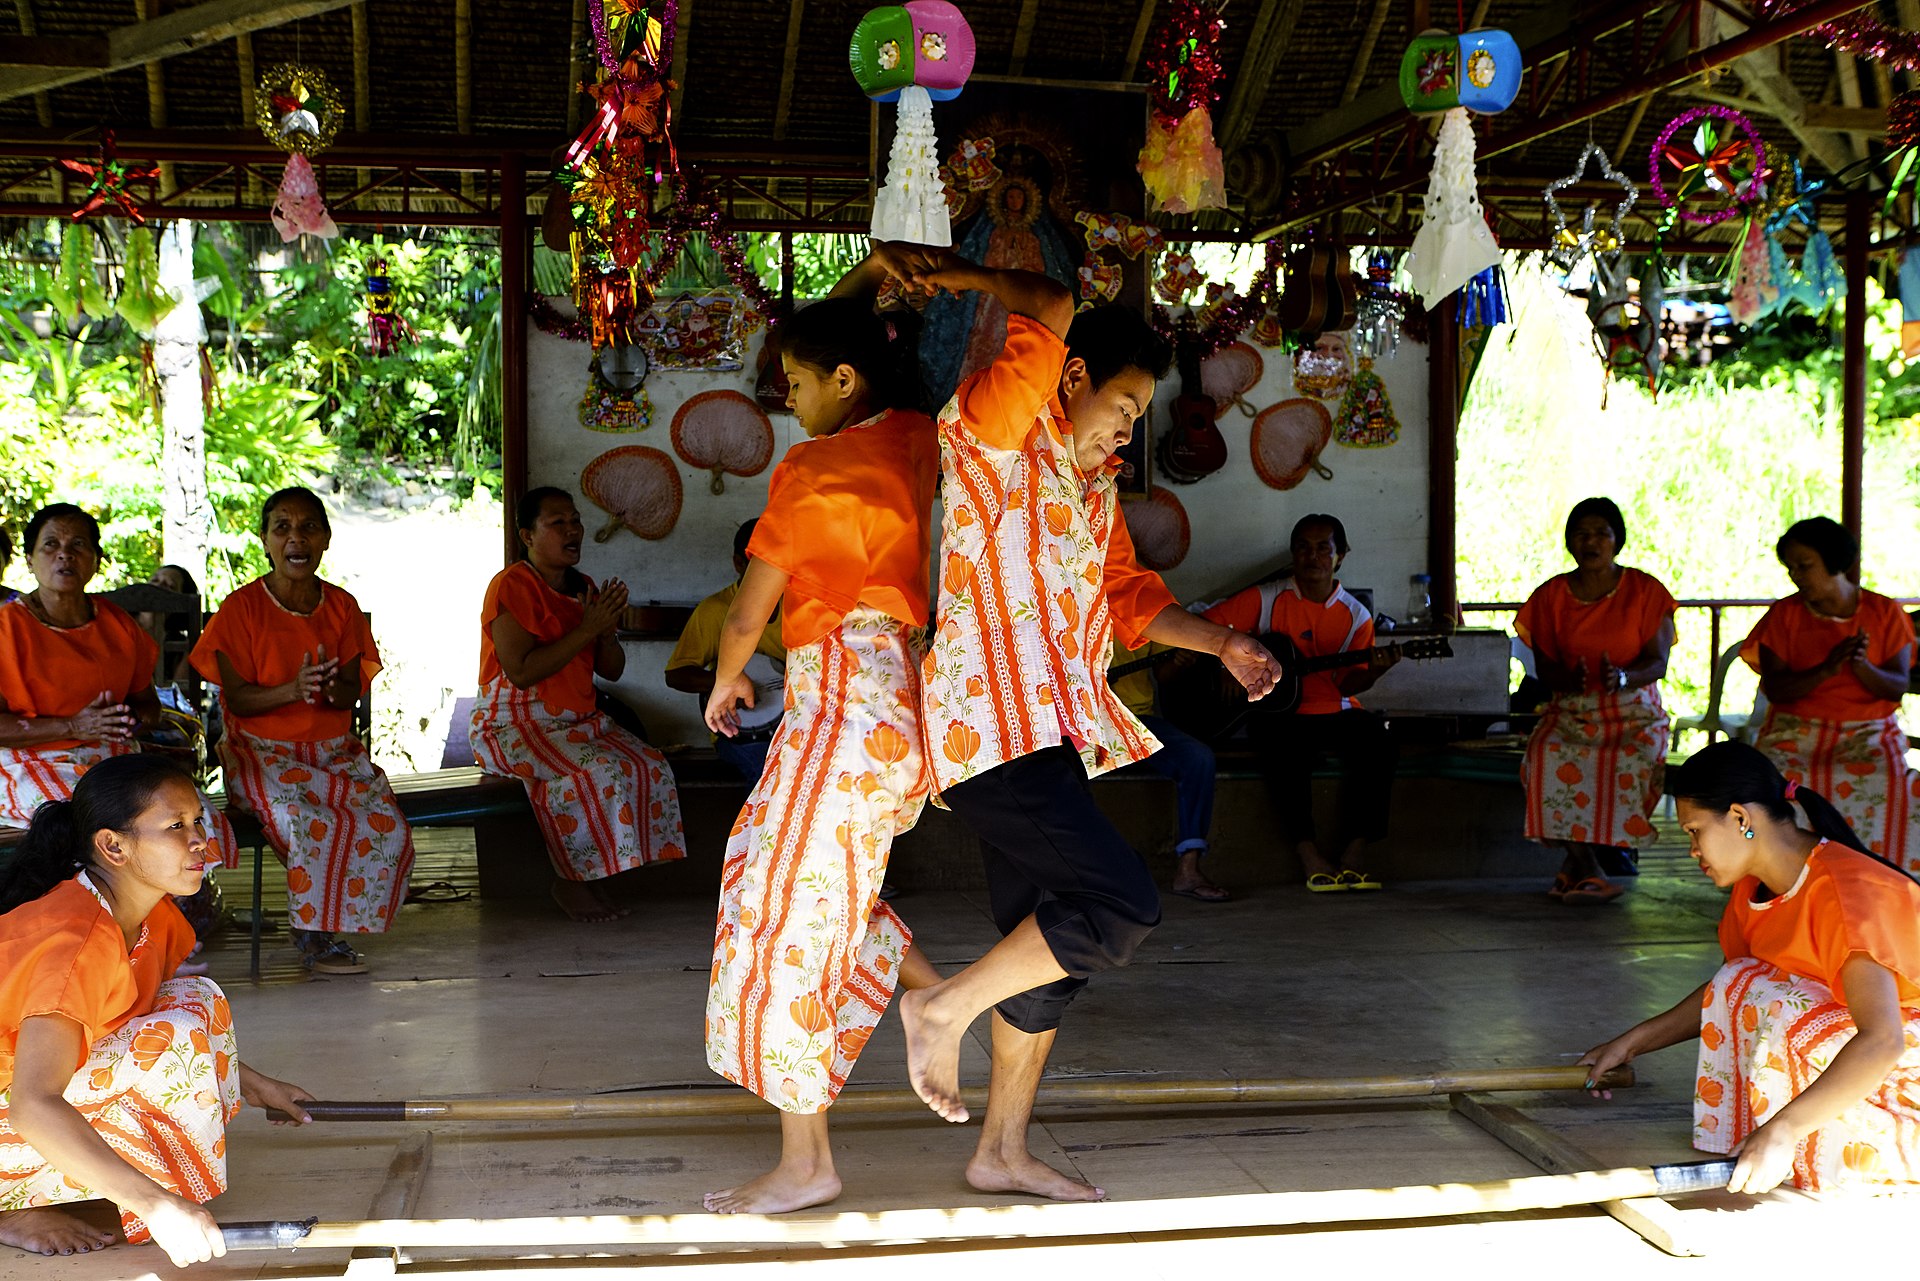 A man and a woman doing the Tinikling Dance of the Philippines using bamboo sticks